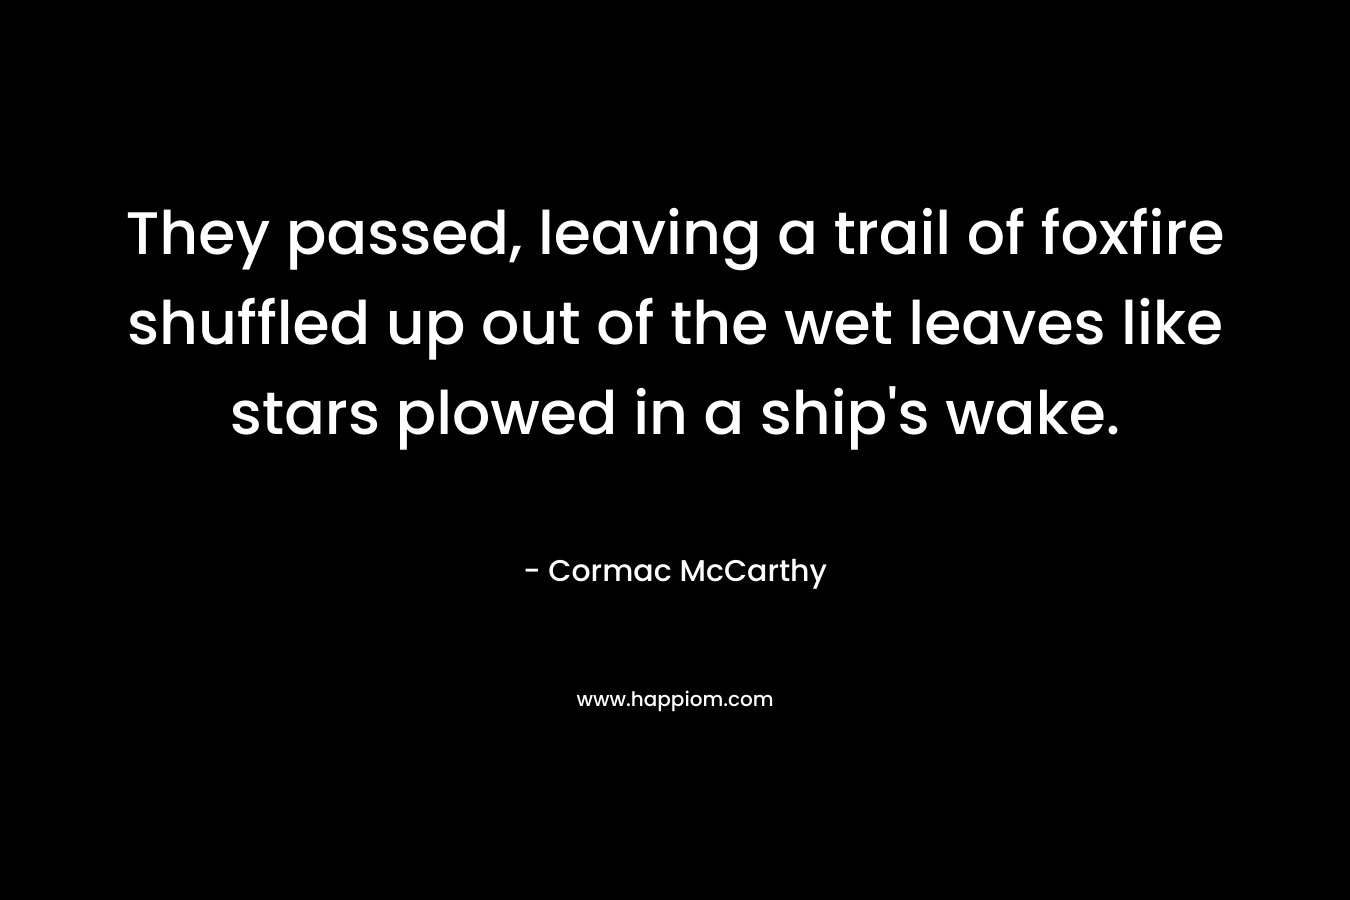 They passed, leaving a trail of foxfire shuffled up out of the wet leaves like stars plowed in a ship’s wake. – Cormac McCarthy